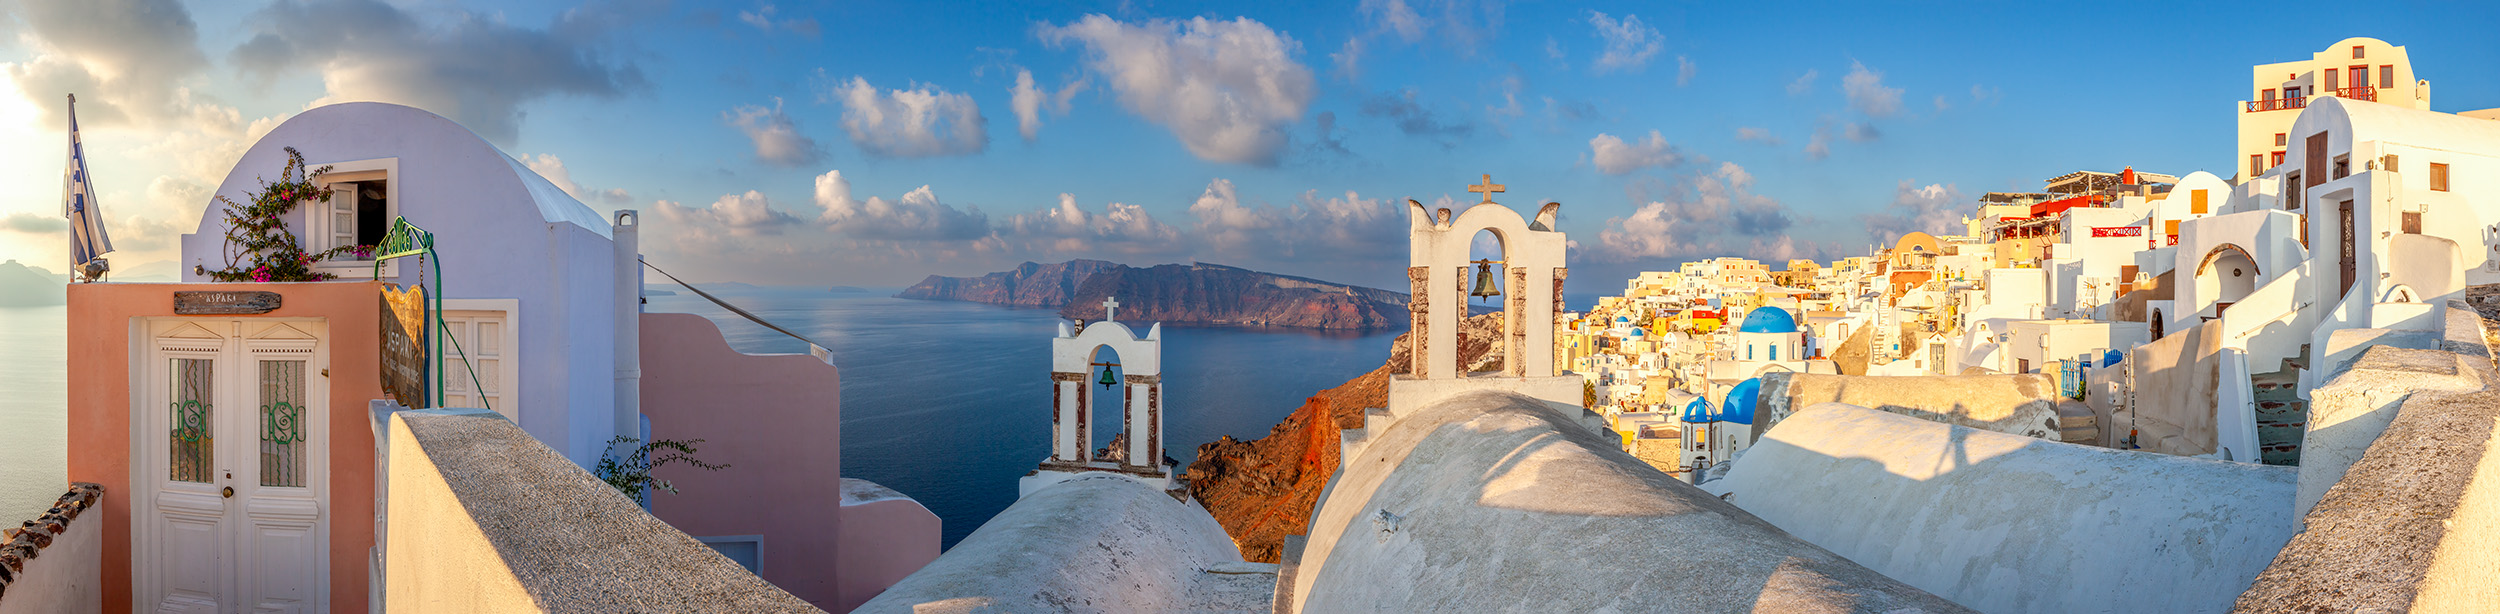 Embarking on an early morning stroll through Oia, Santorini, Greece, I found myself capturing the essence of this charming village...